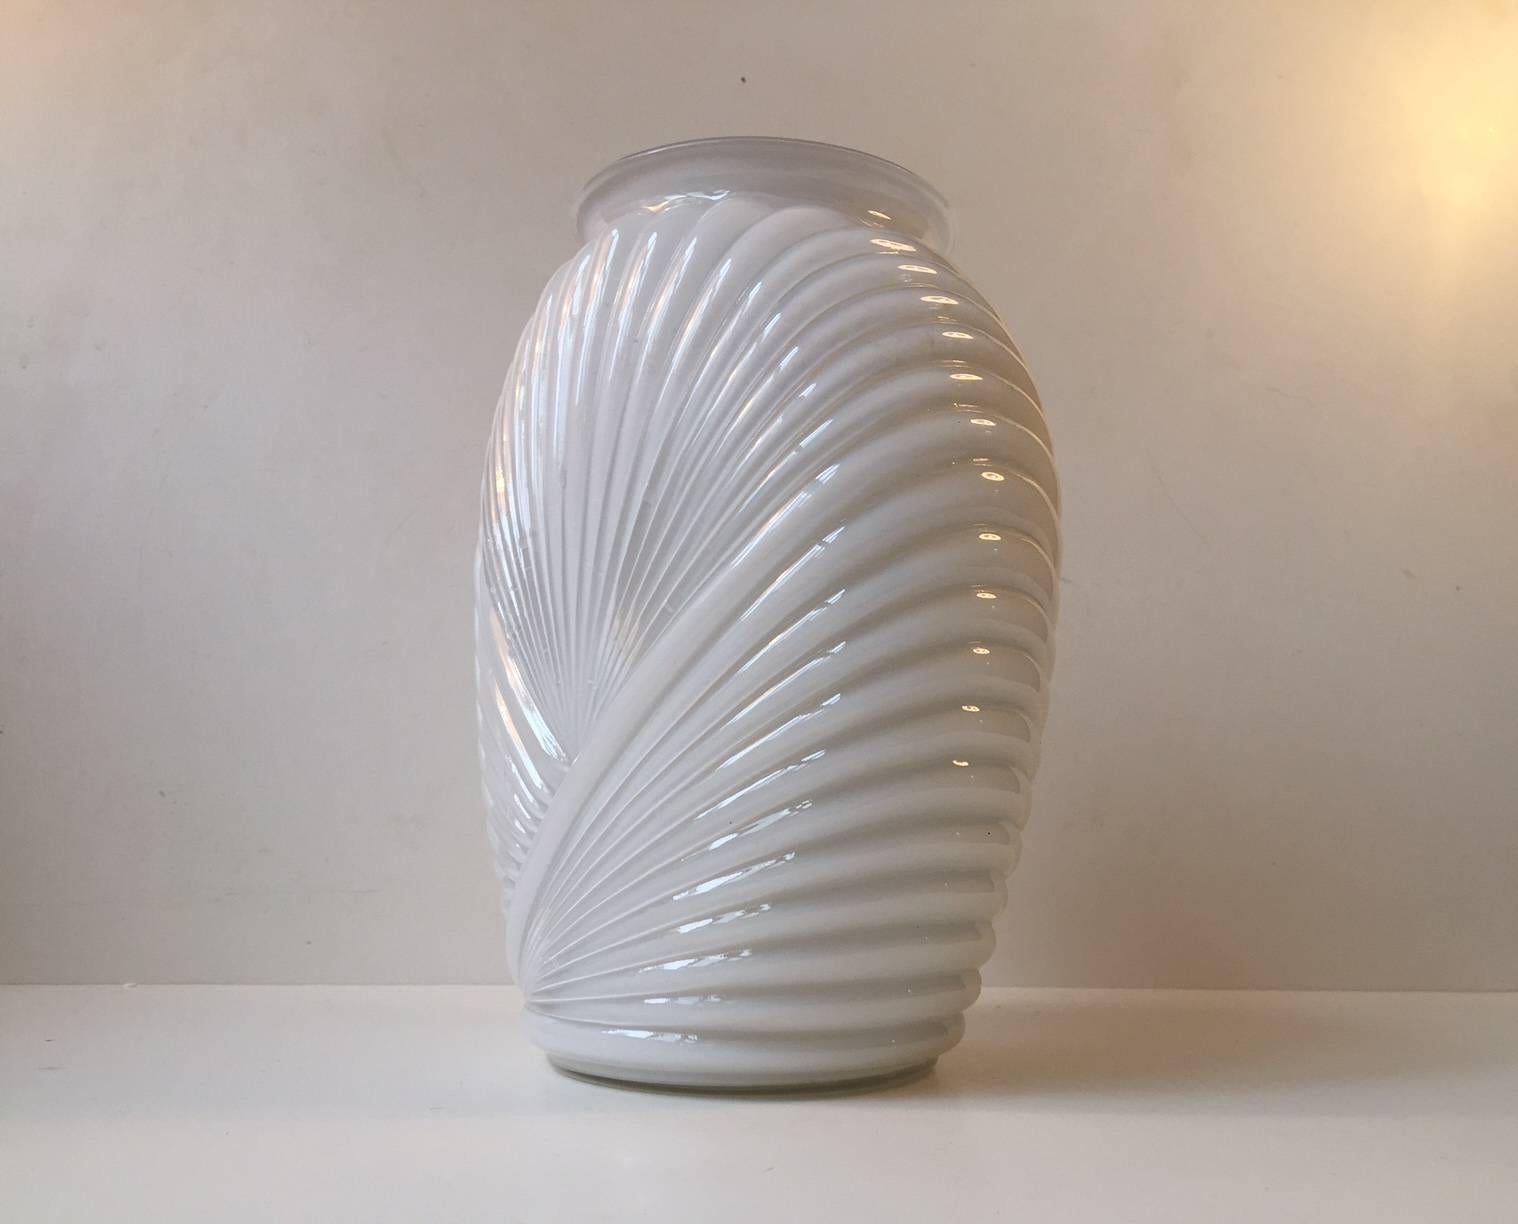 Unusual molded vase in draped opaline glass. Manufactured and designed in Belgium in the late 1920s or early 1930s.